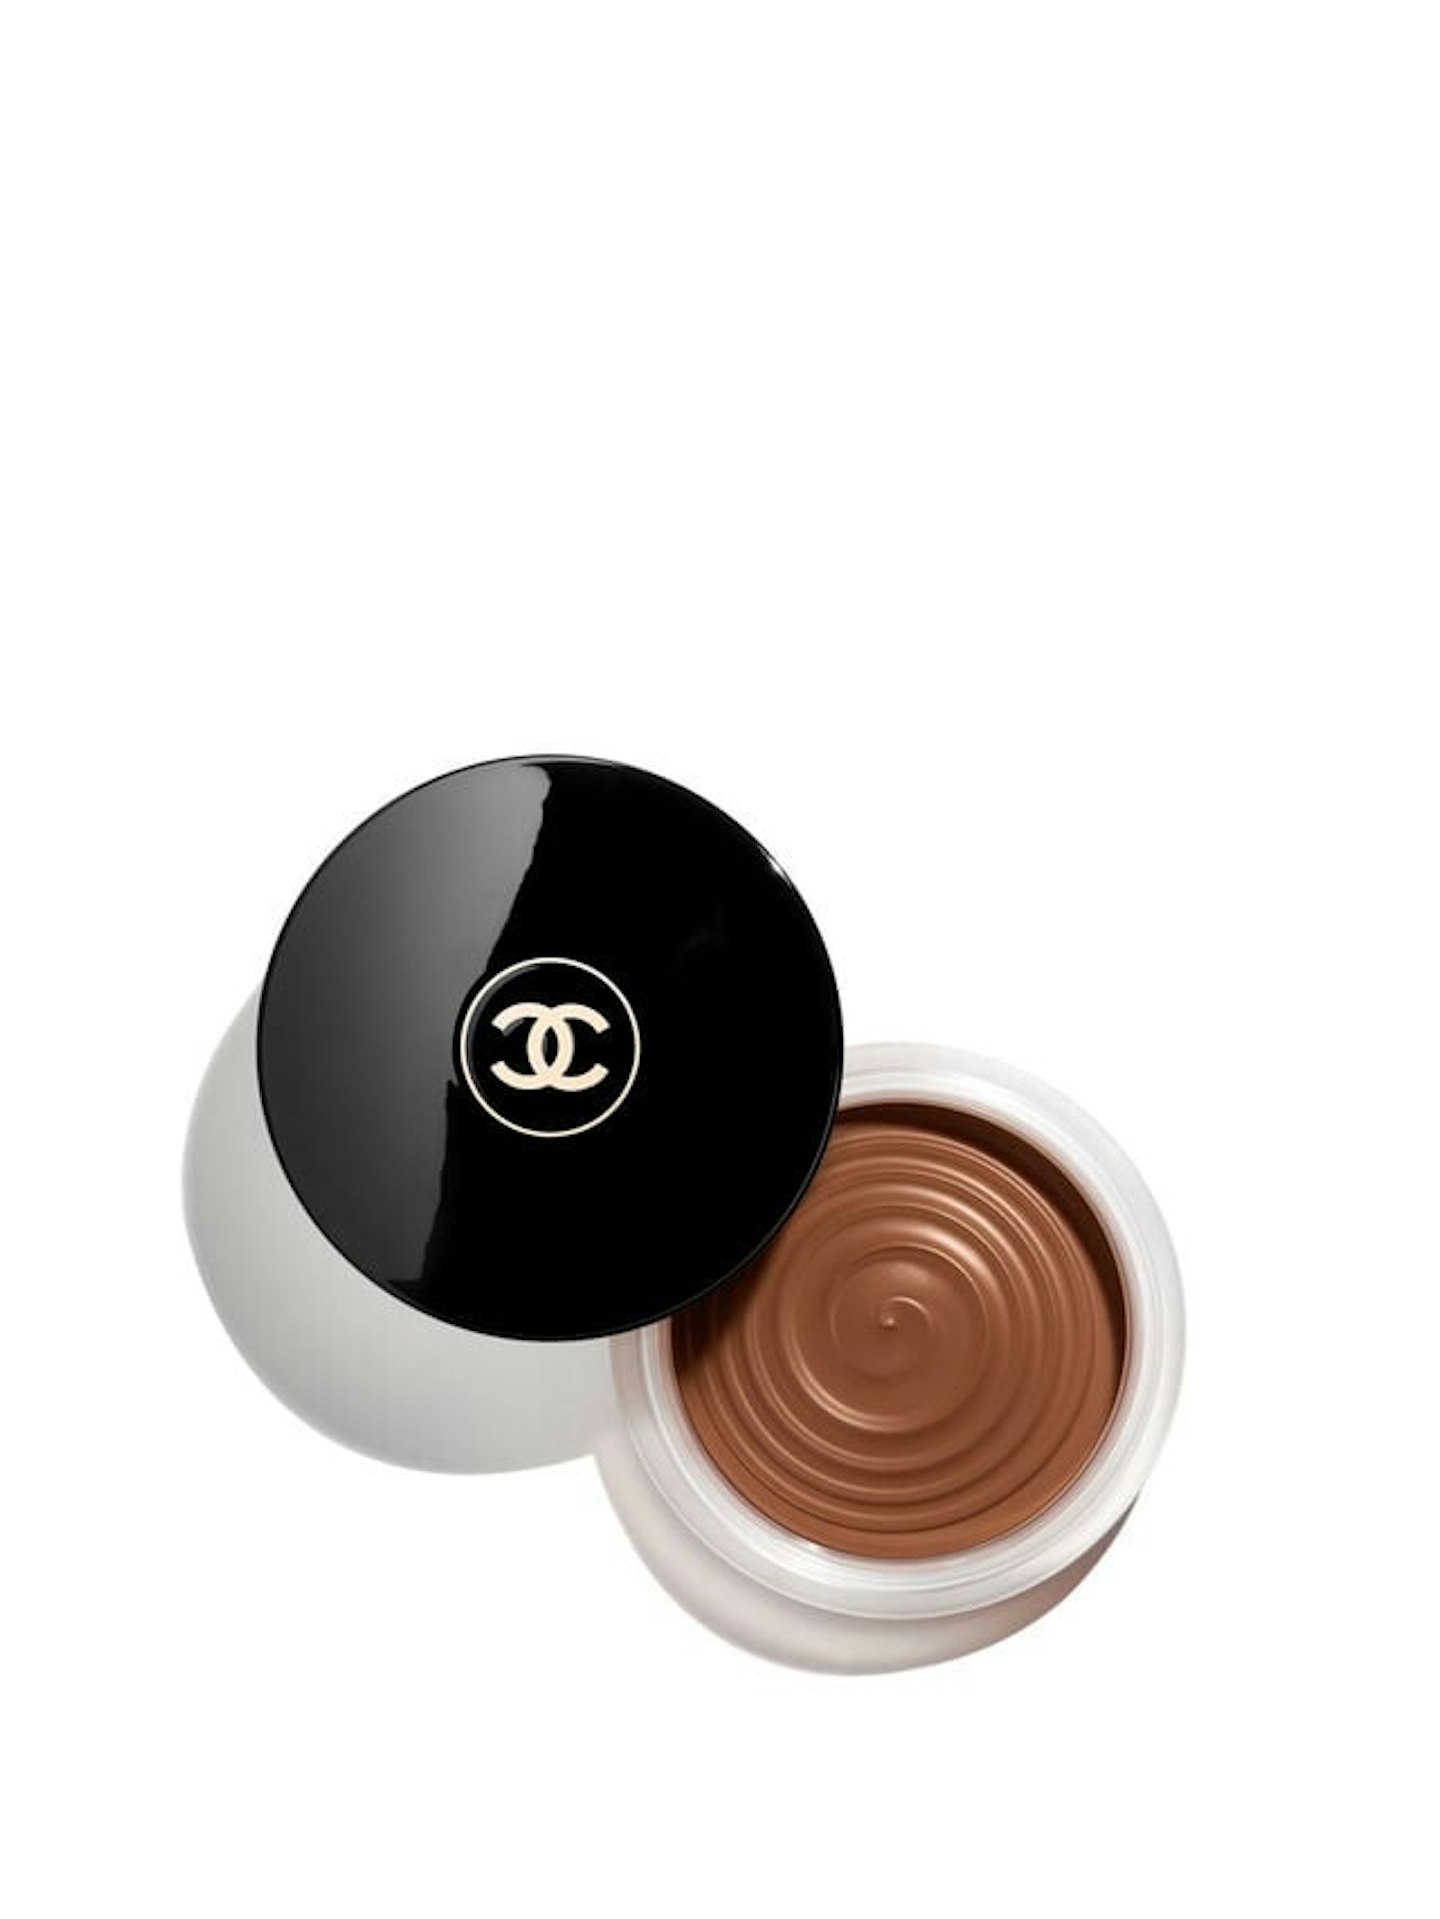 Chanel Les Beiges Bronzing Cream: Is It Really Worth The Hype?